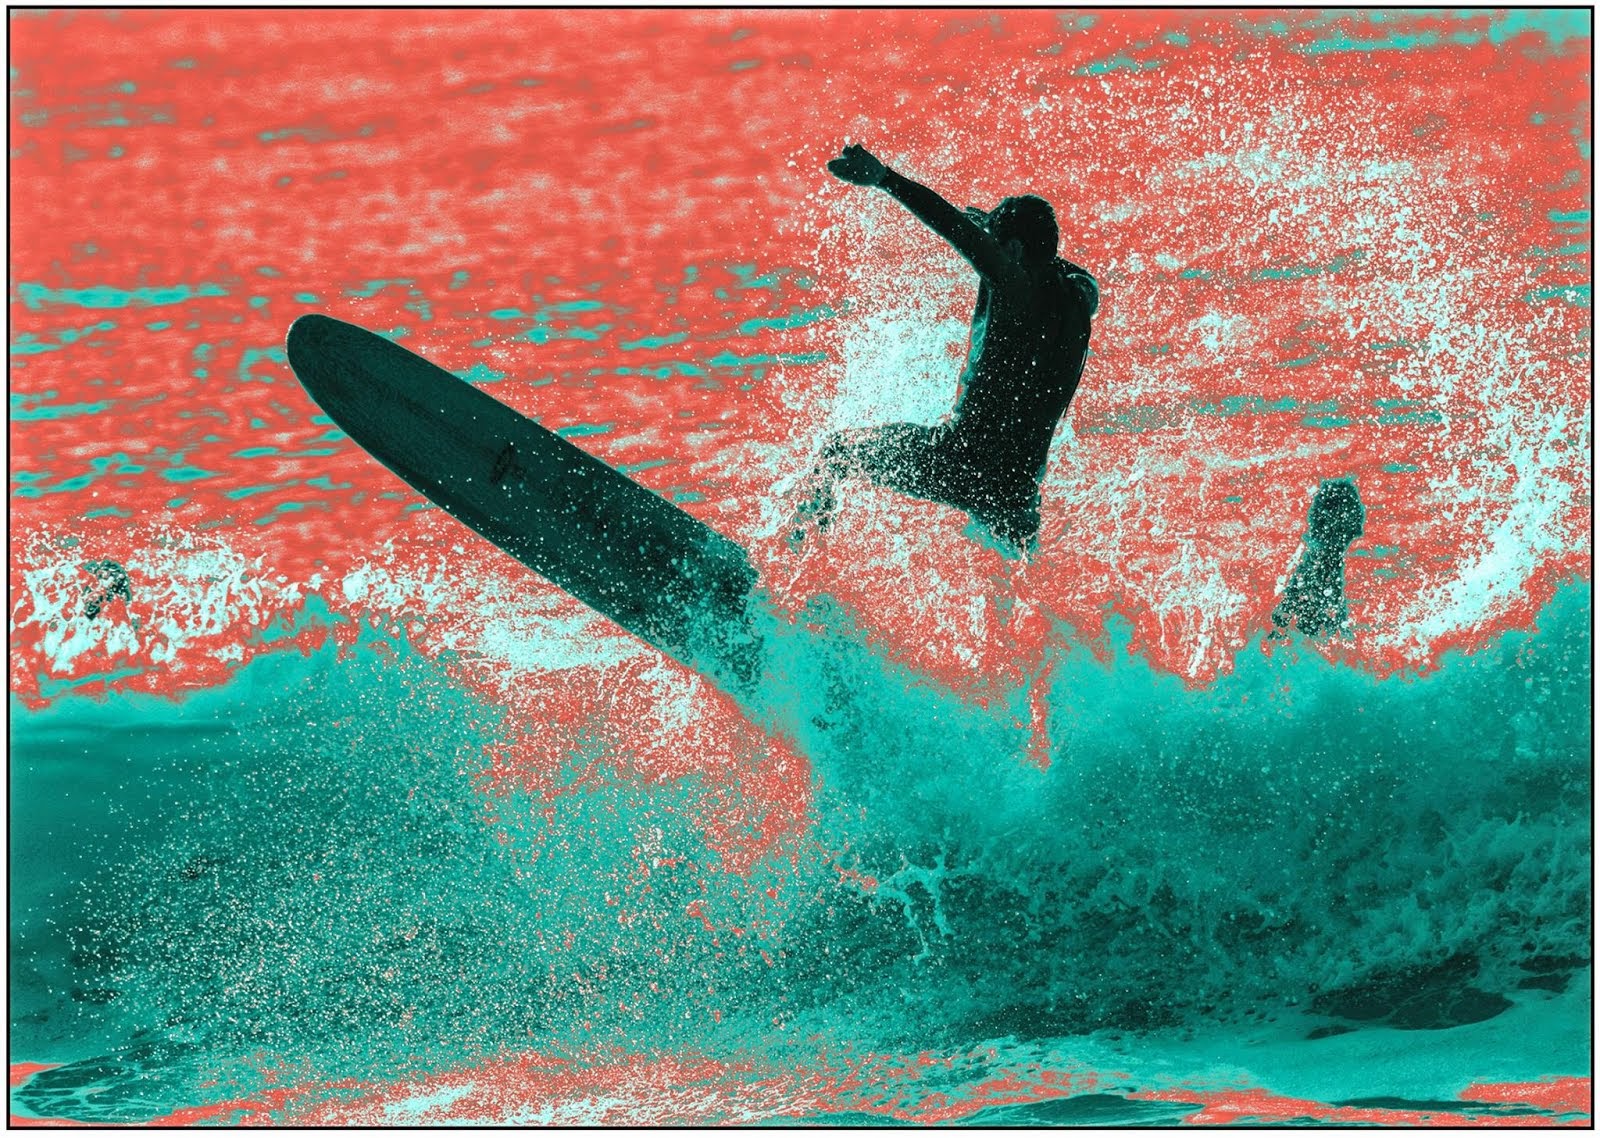 The ART of SURFing